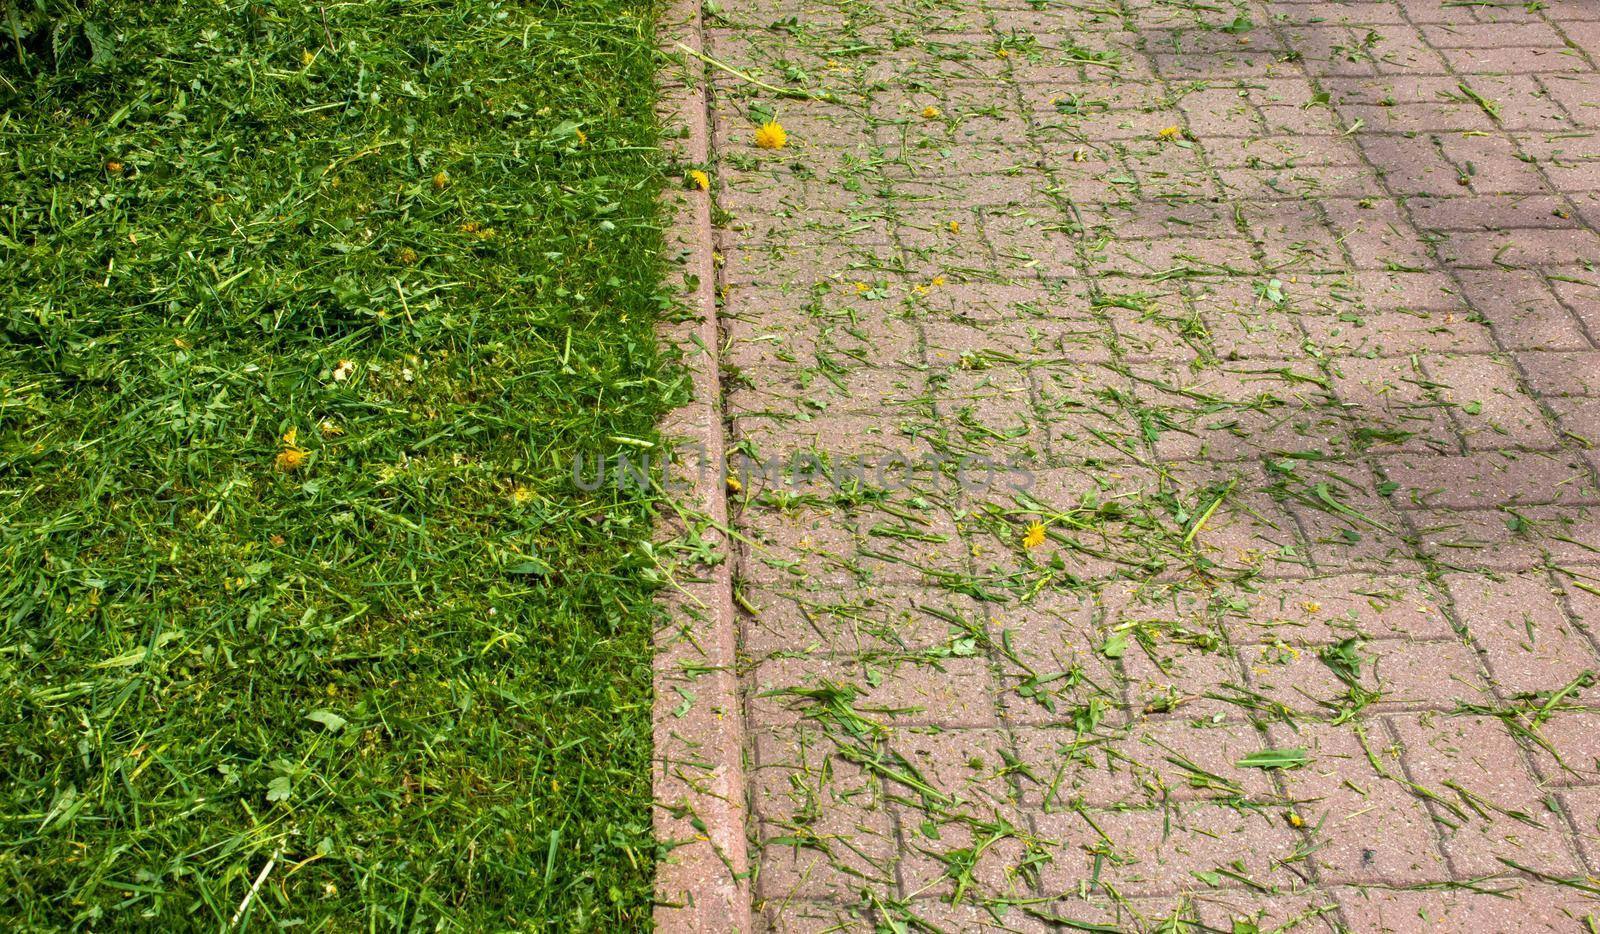 Mown fresh grass on the lawn and sidewalk.